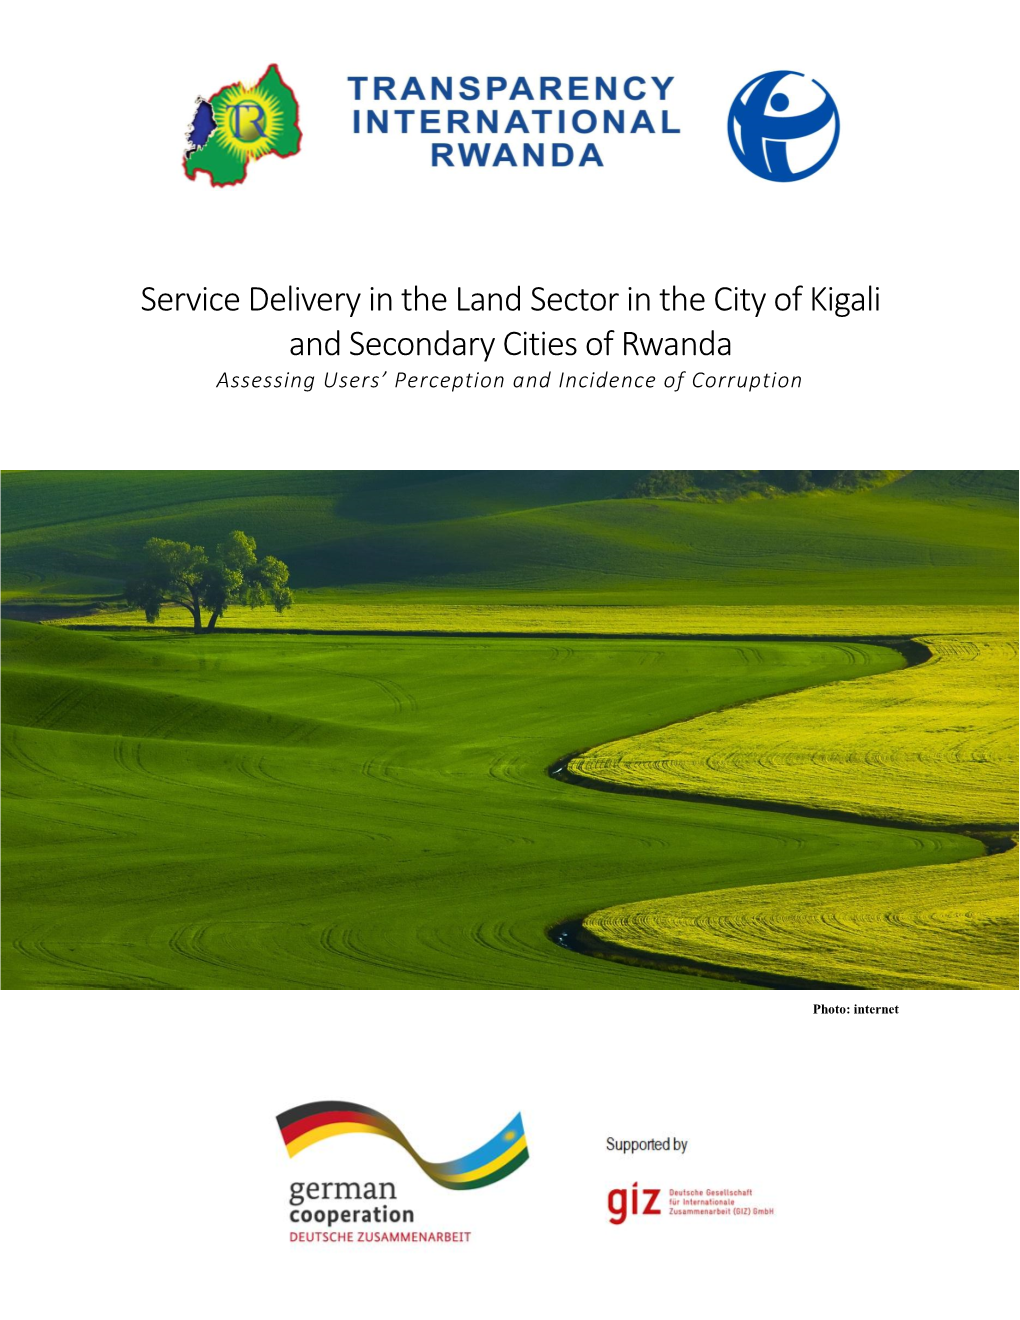 Service Delivery in the Land Sector in the City of Kigali and Secondary Cities of Rwanda Assessing Users’ Perception and Incidence of Corruption